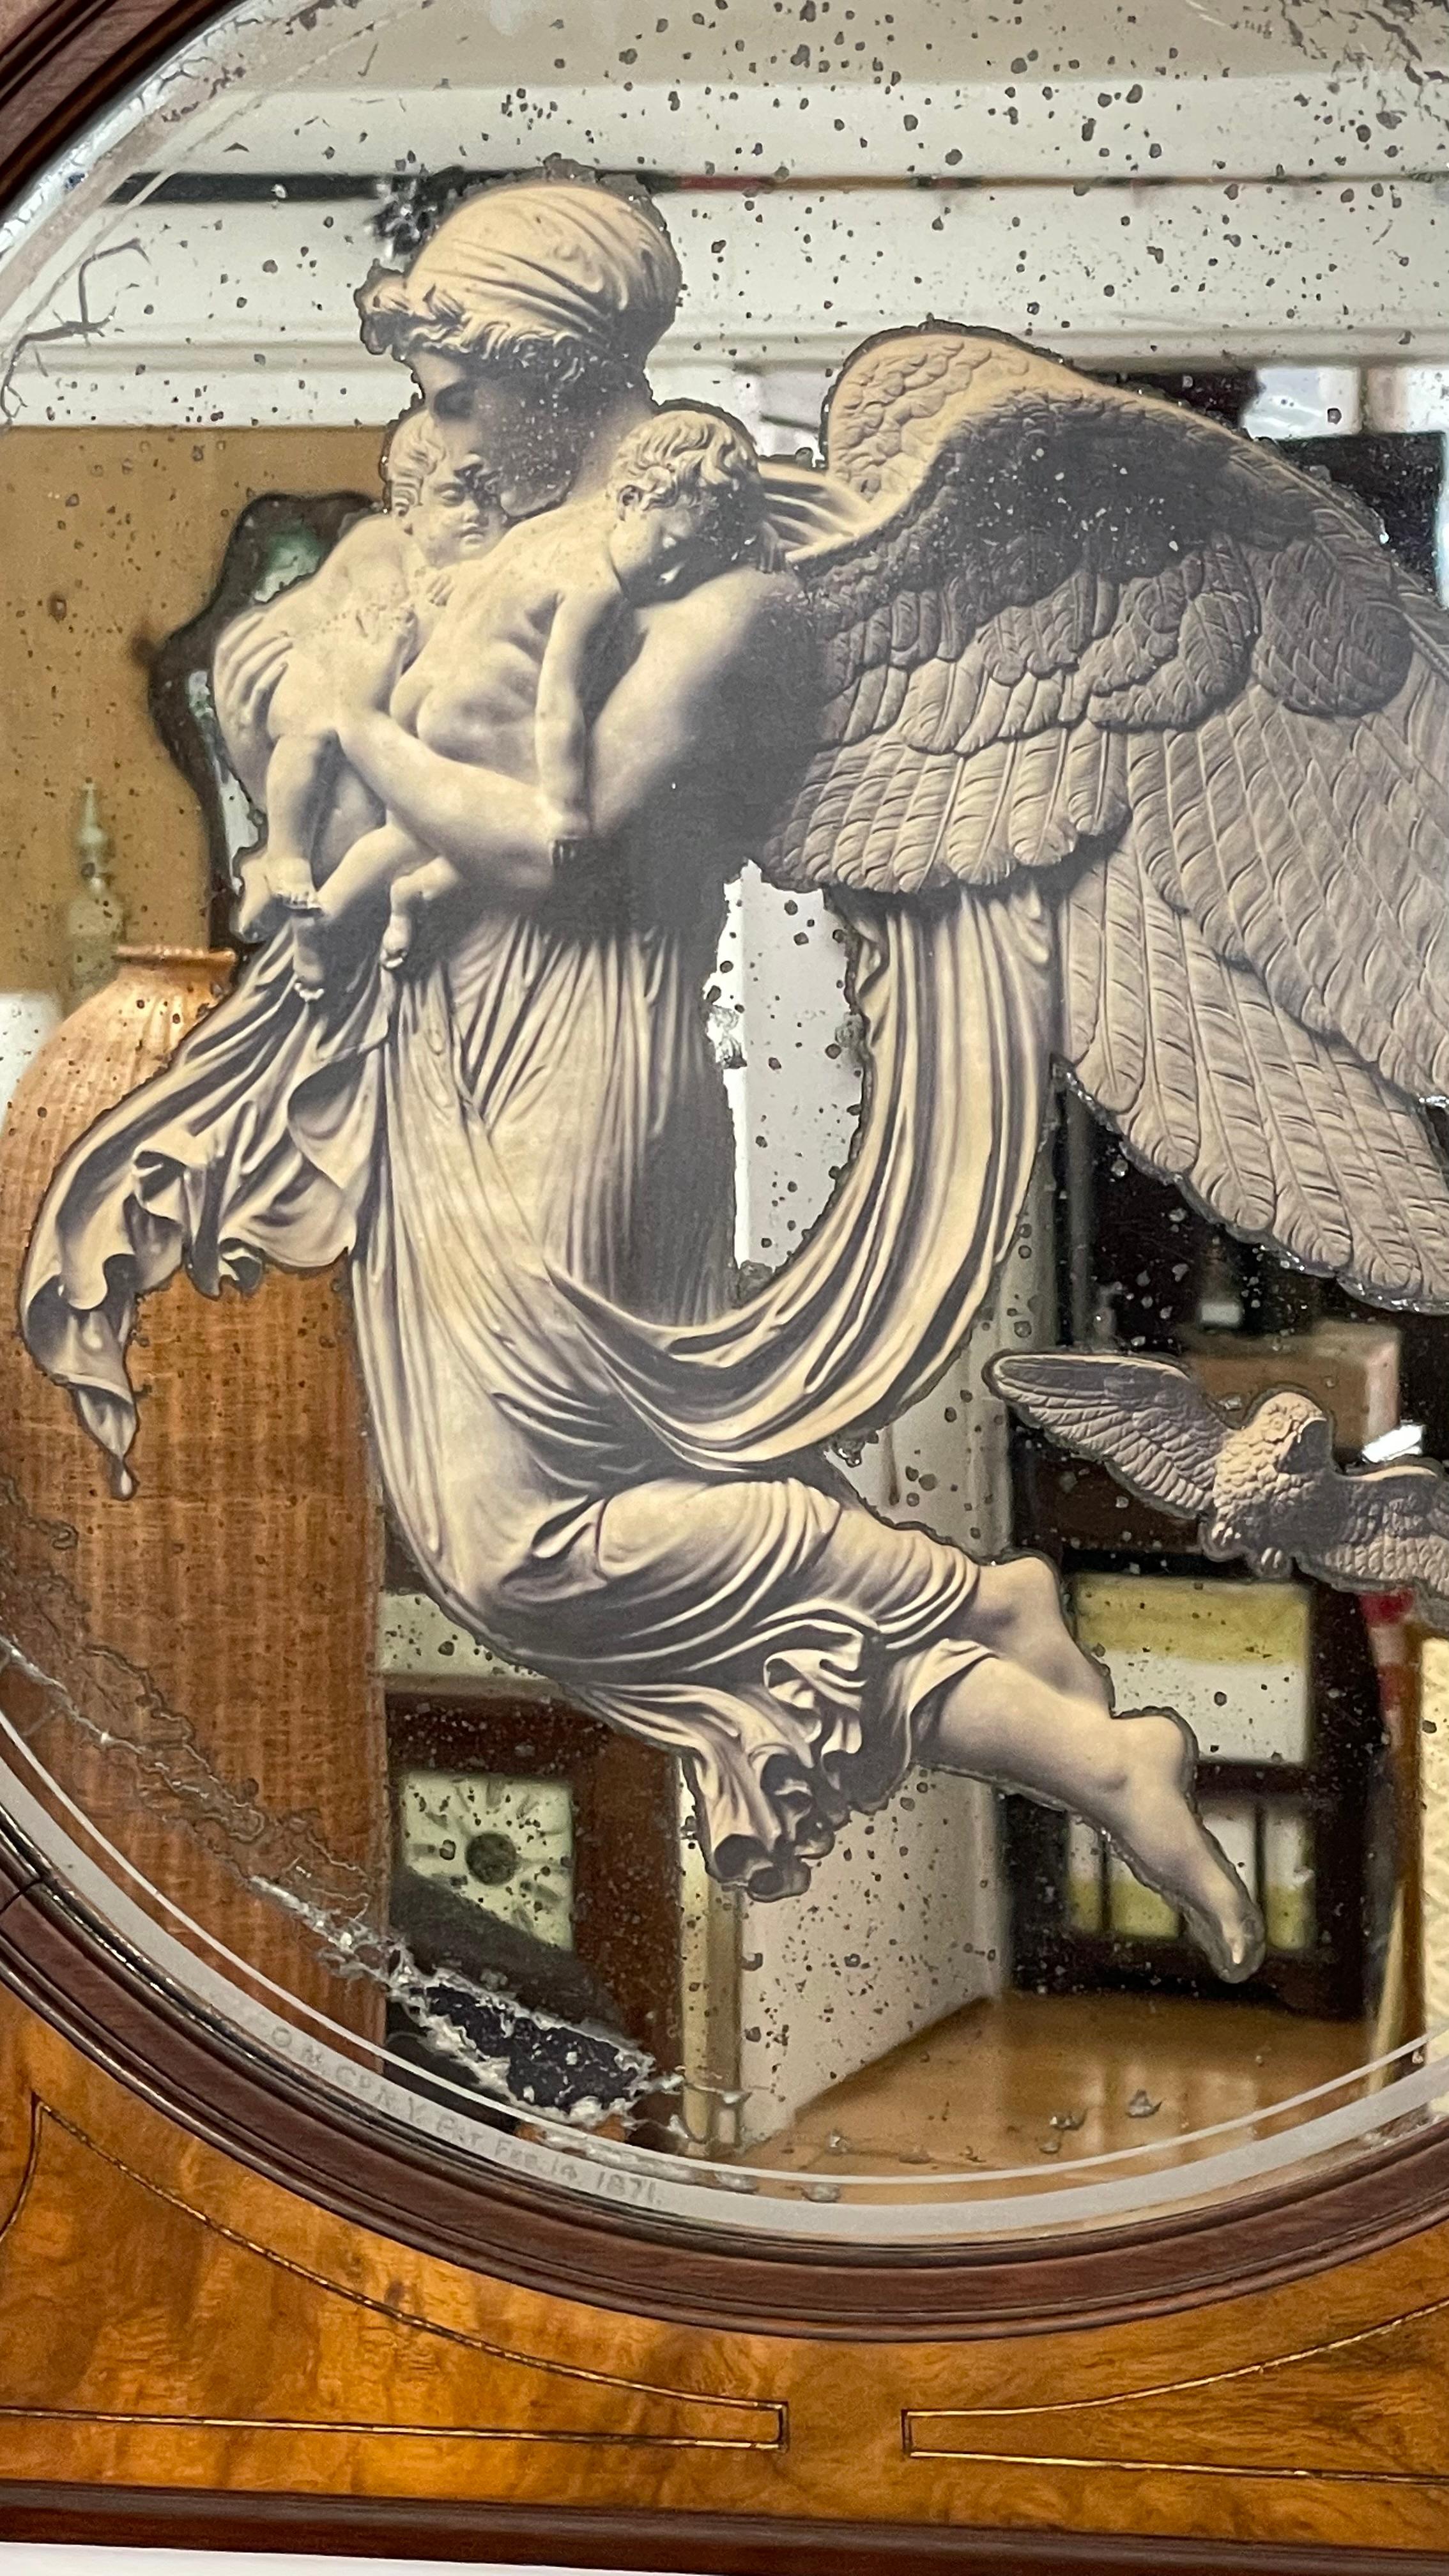 19th century Eastlake mirror with reverse painting of angel

22 x 22